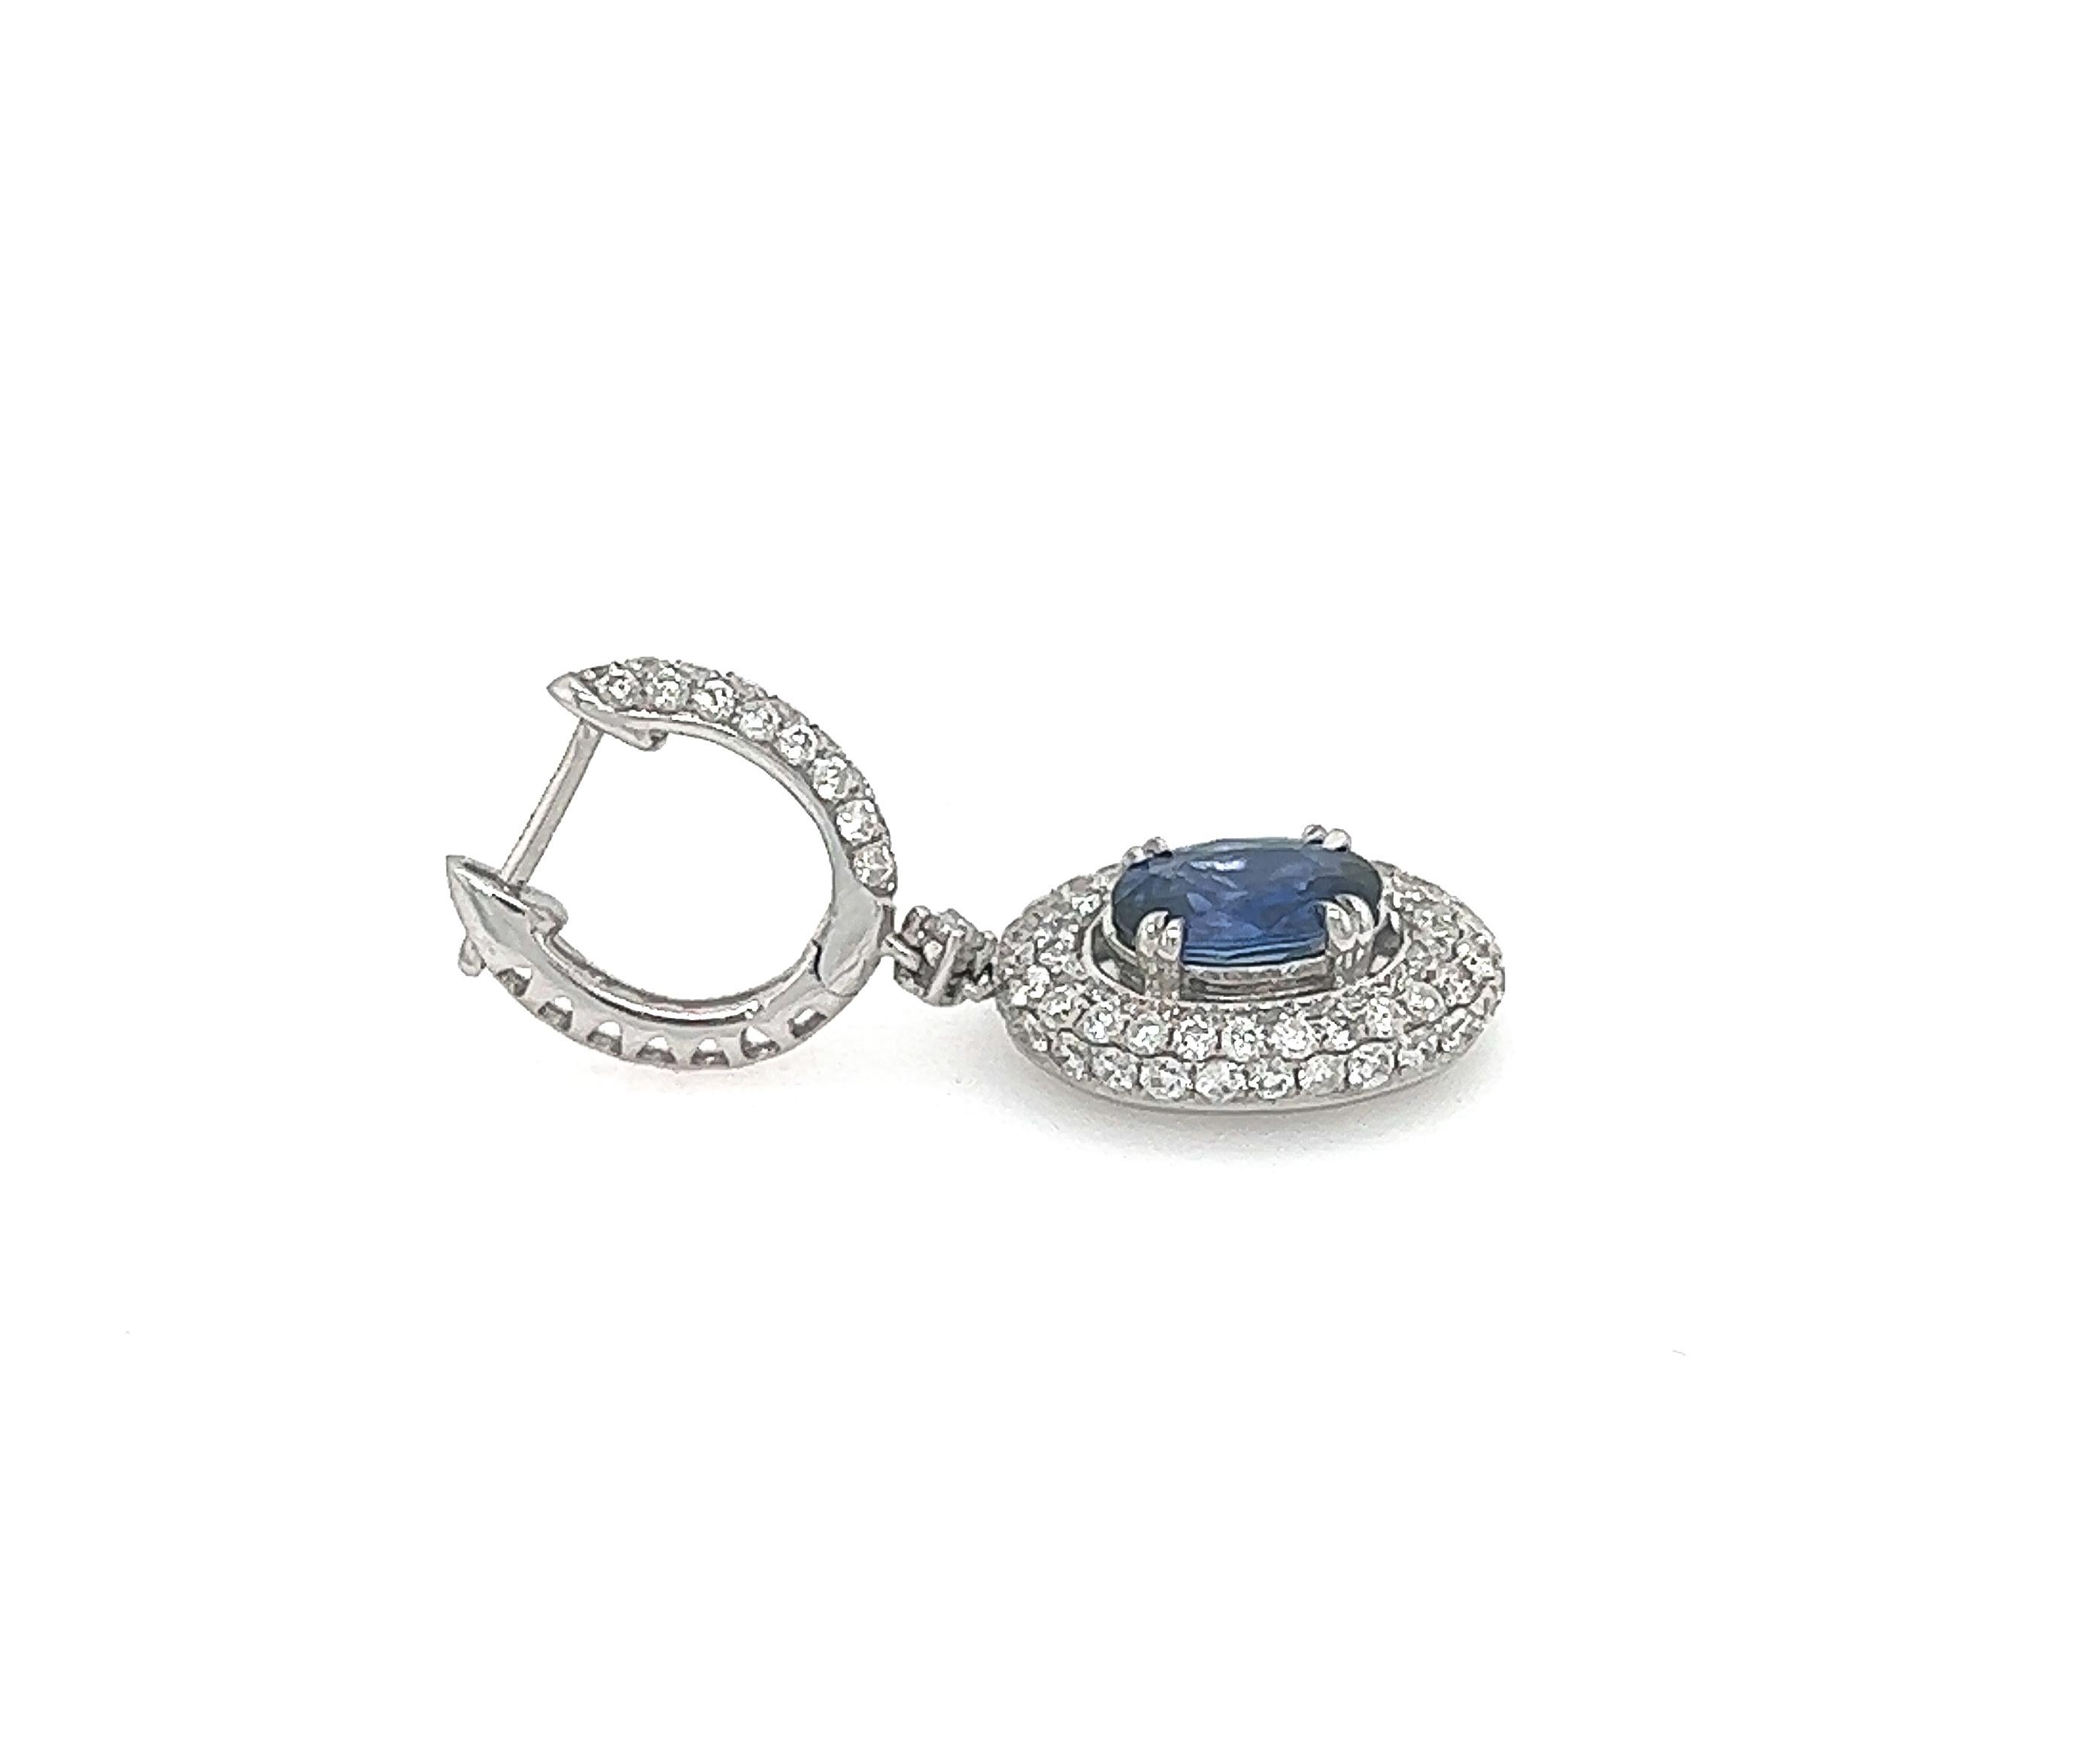 Women's or Men's 5.01 Total Carat Fancy Sapphire Earrings with Pave Diamond Halo in 18K White Gol For Sale